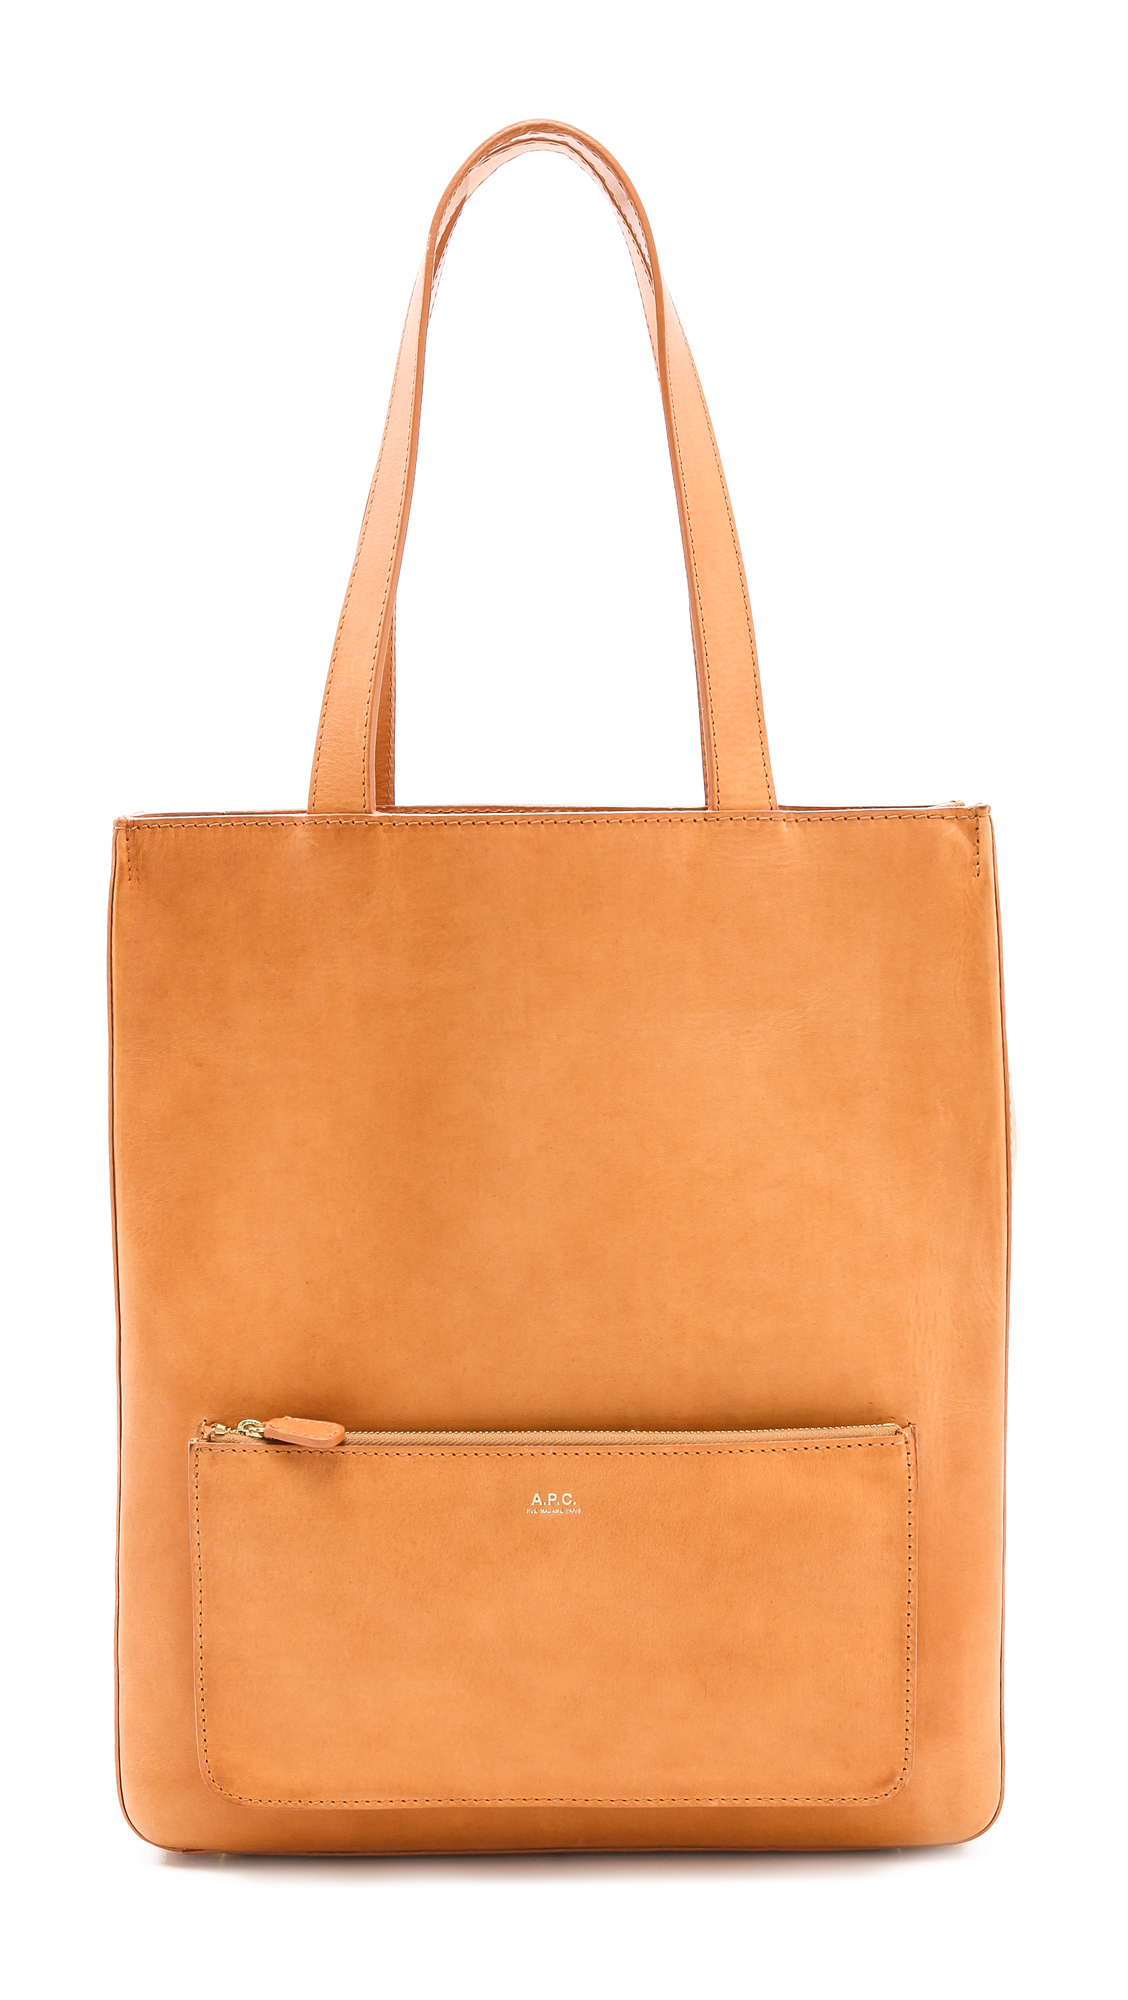 Lyst - A.P.C. Cabas Bag in Natural